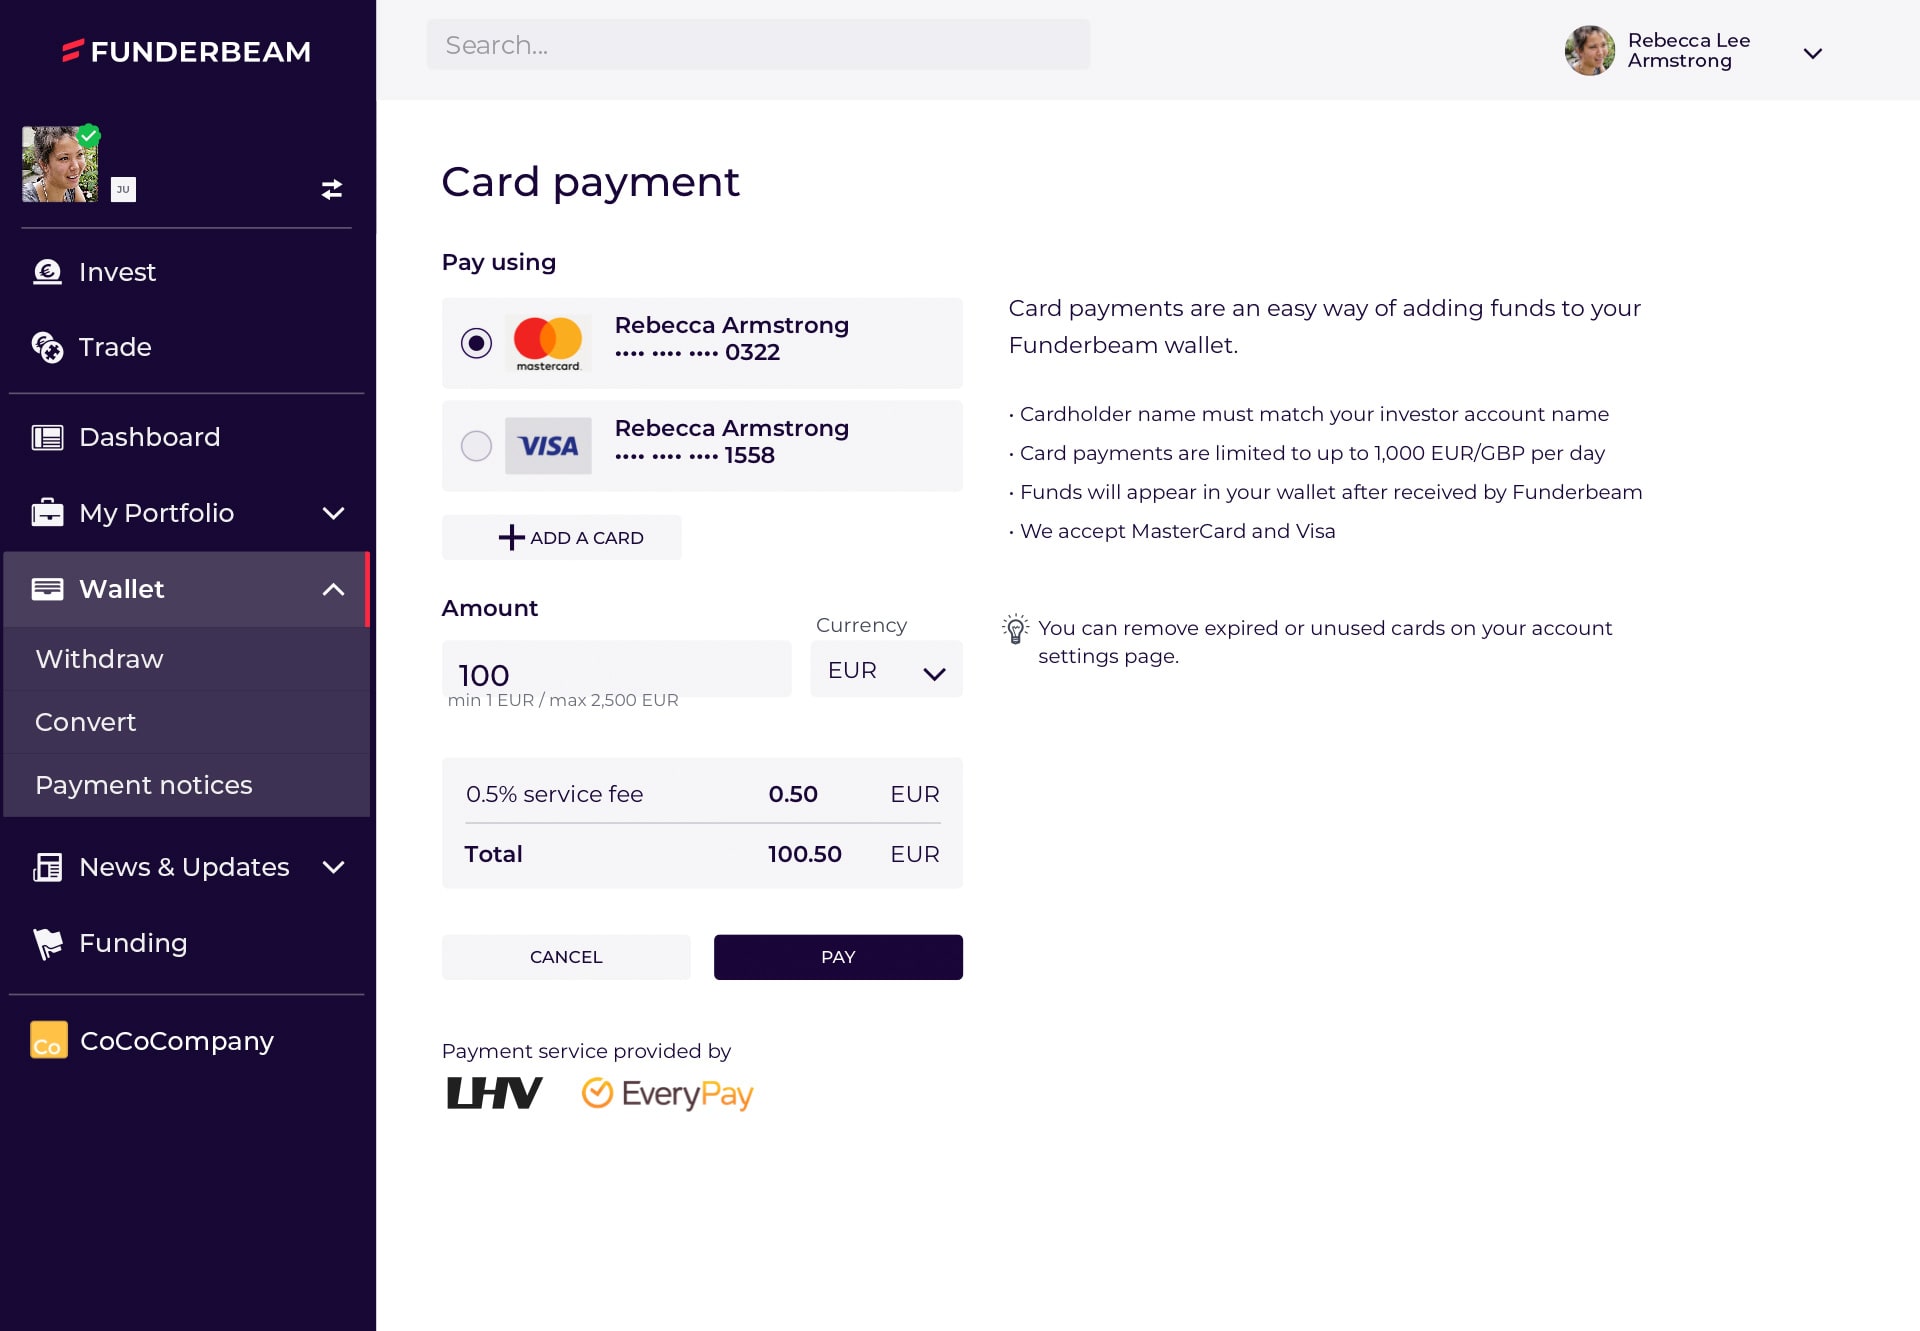 The Card payment page